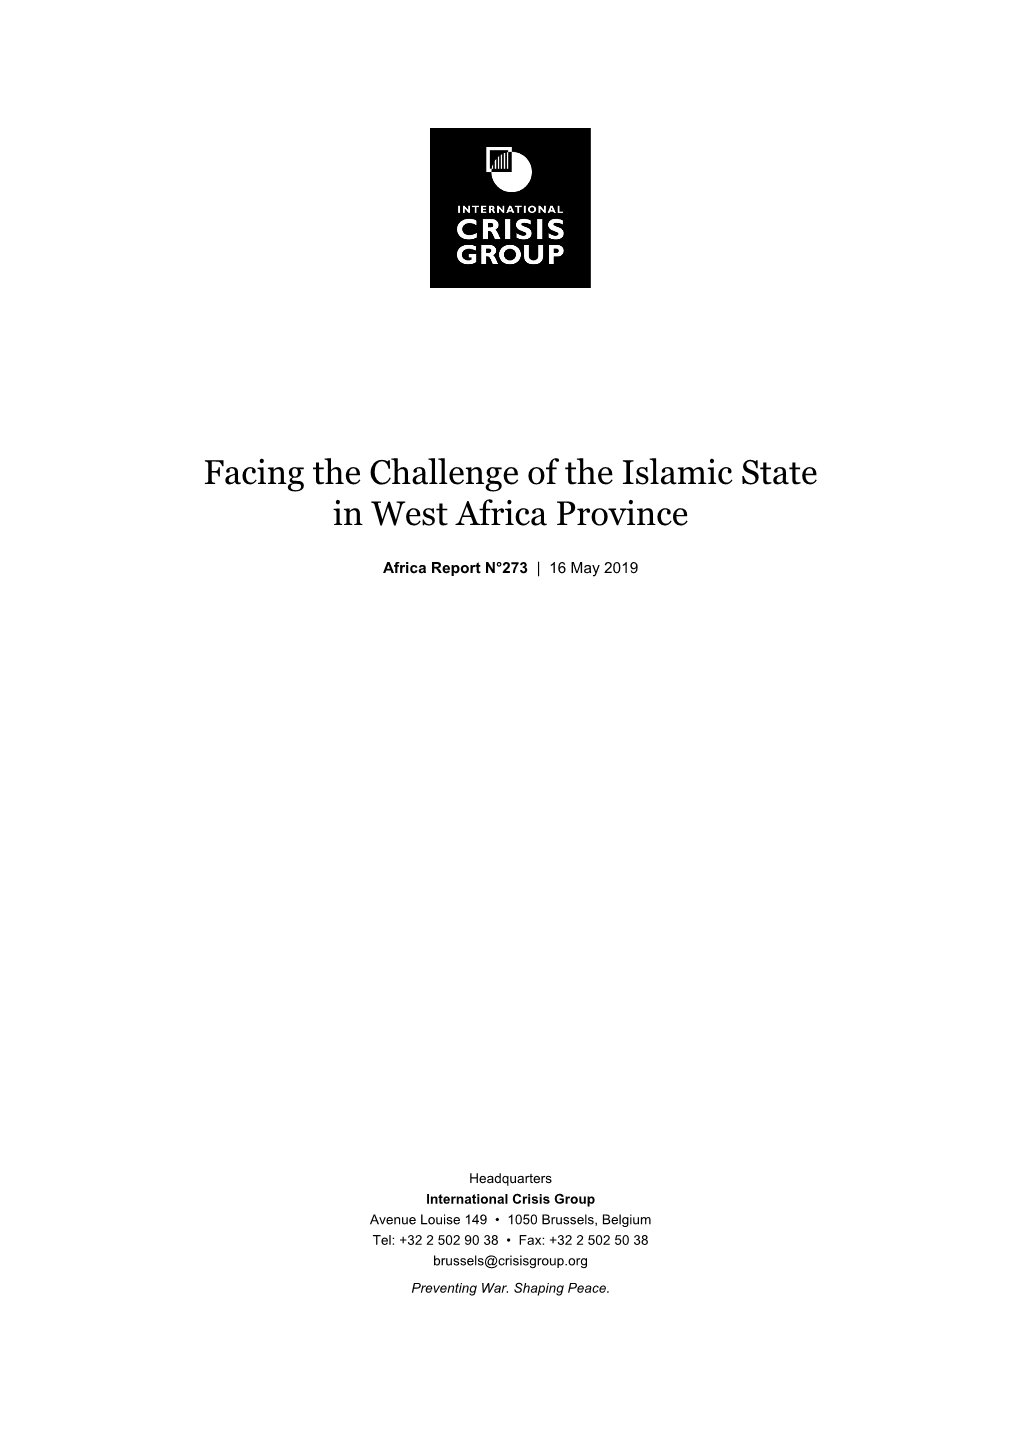 Facing the Challenge of the Islamic State in West Africa Province